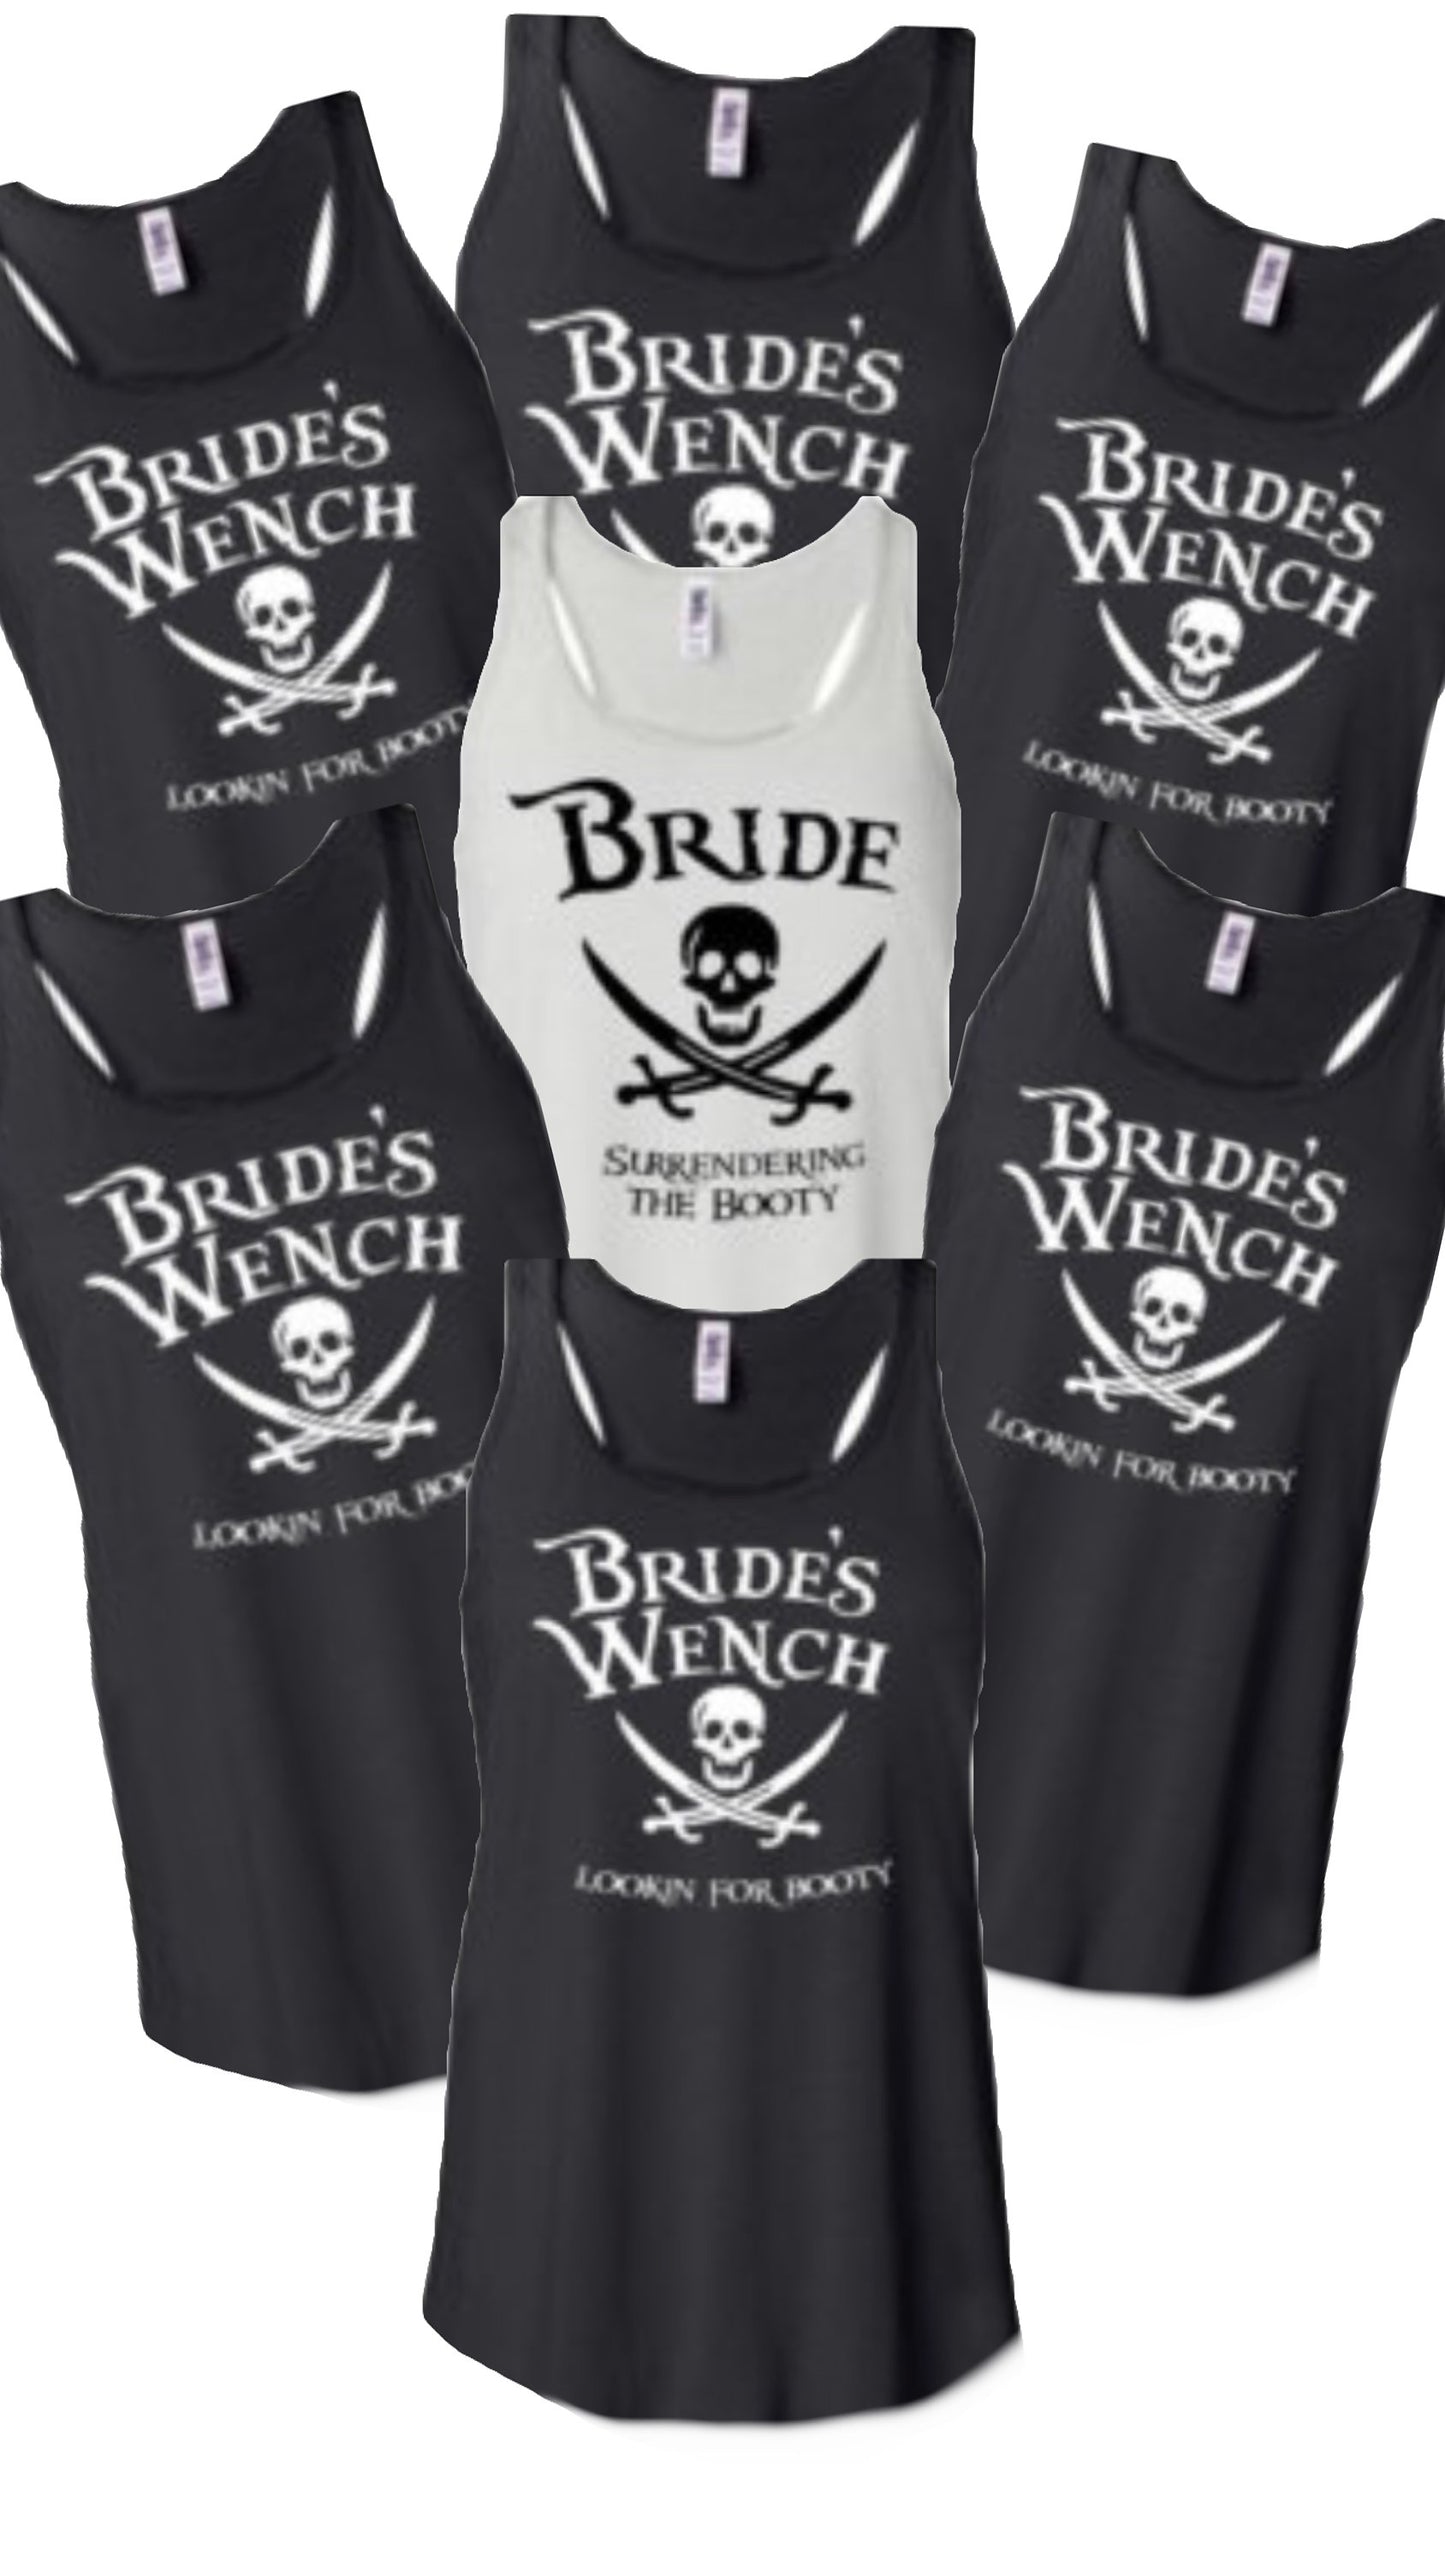 Brides wenches, Bride and her wenches shirt, bridesmaid shirts, bride shirt, Pirate bachelorette, bachelorette shirts, bach party, pirate